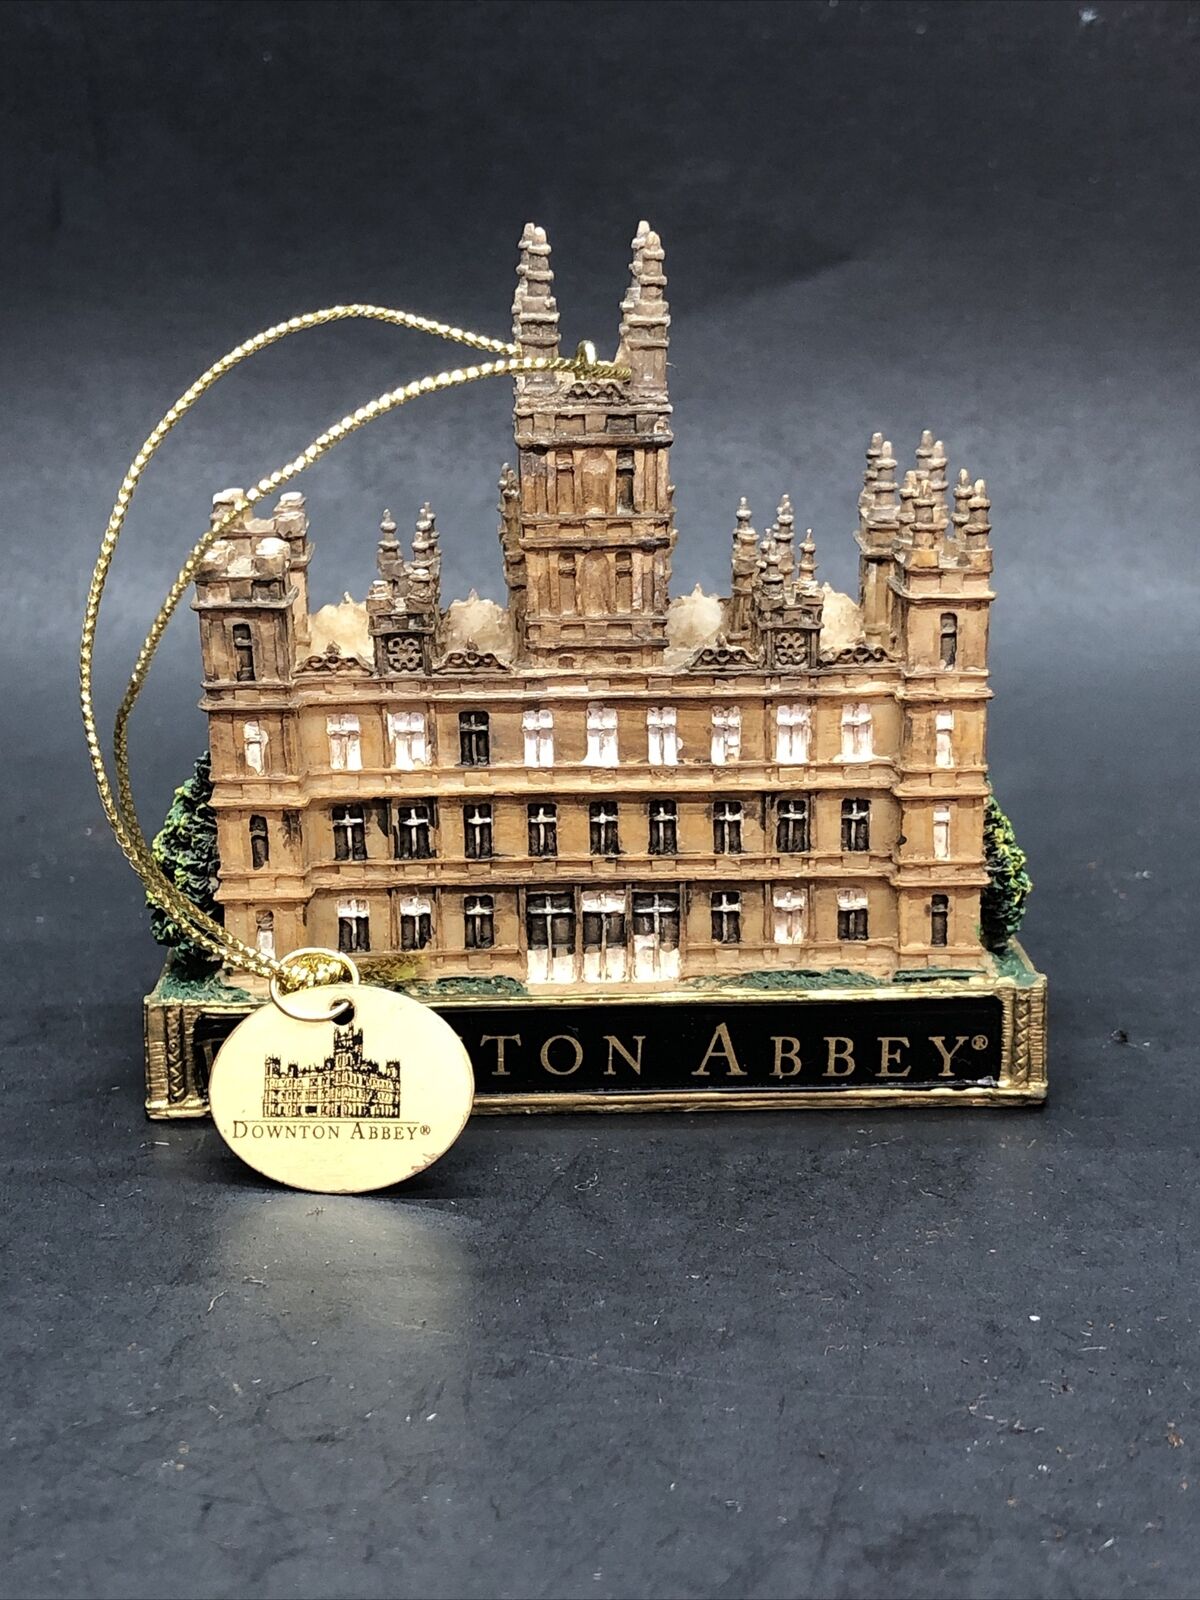 2013 Carnival Film Tv Downton Abbey Yorkshire Country Estate Christmas Ornament